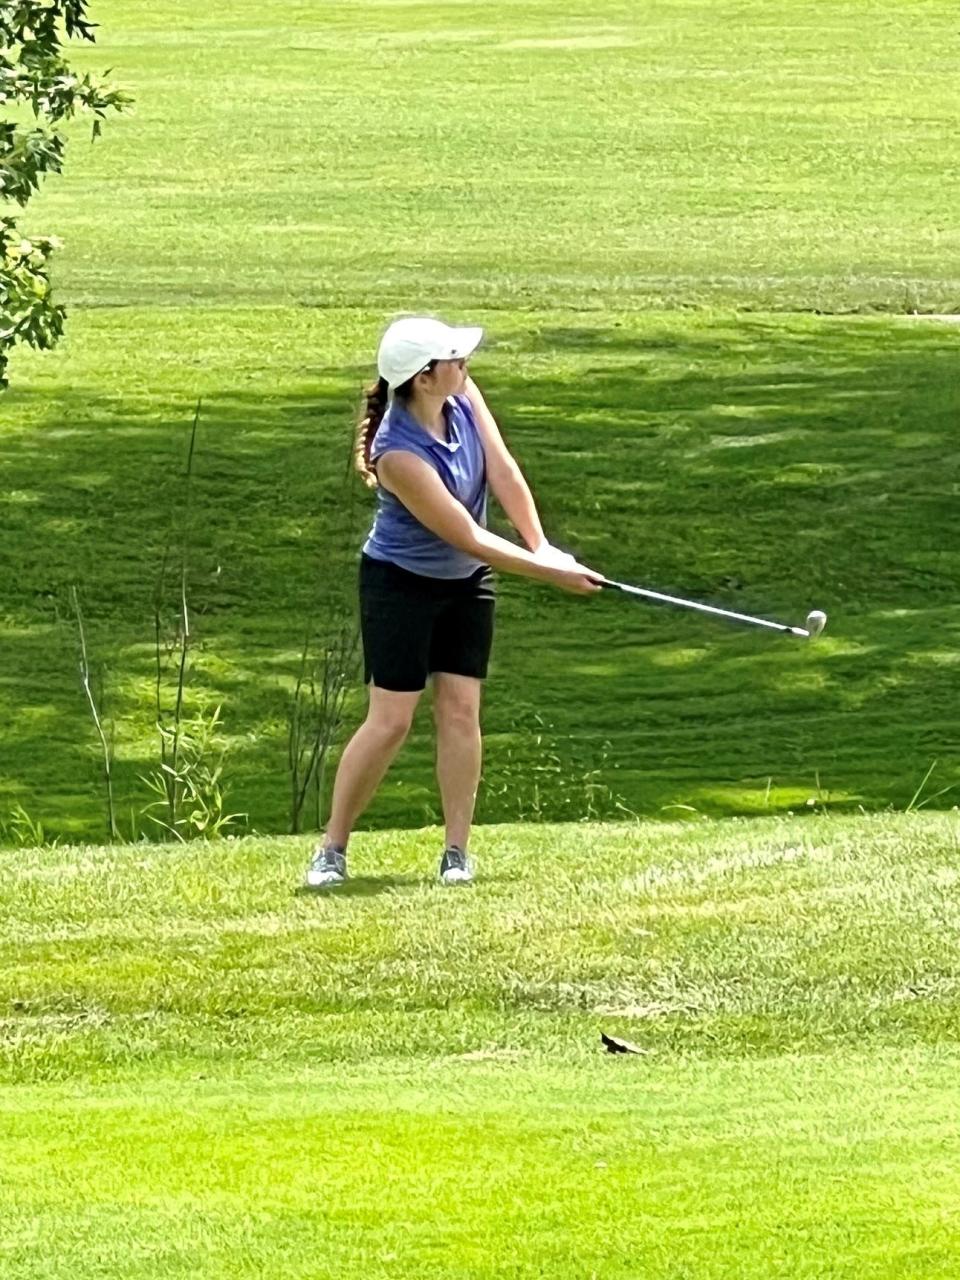 Pleasant's Maura Murphy chips onto the green during the final round of the 47th Ohio Junior Girls Championship this summer at the Marion Country Club.